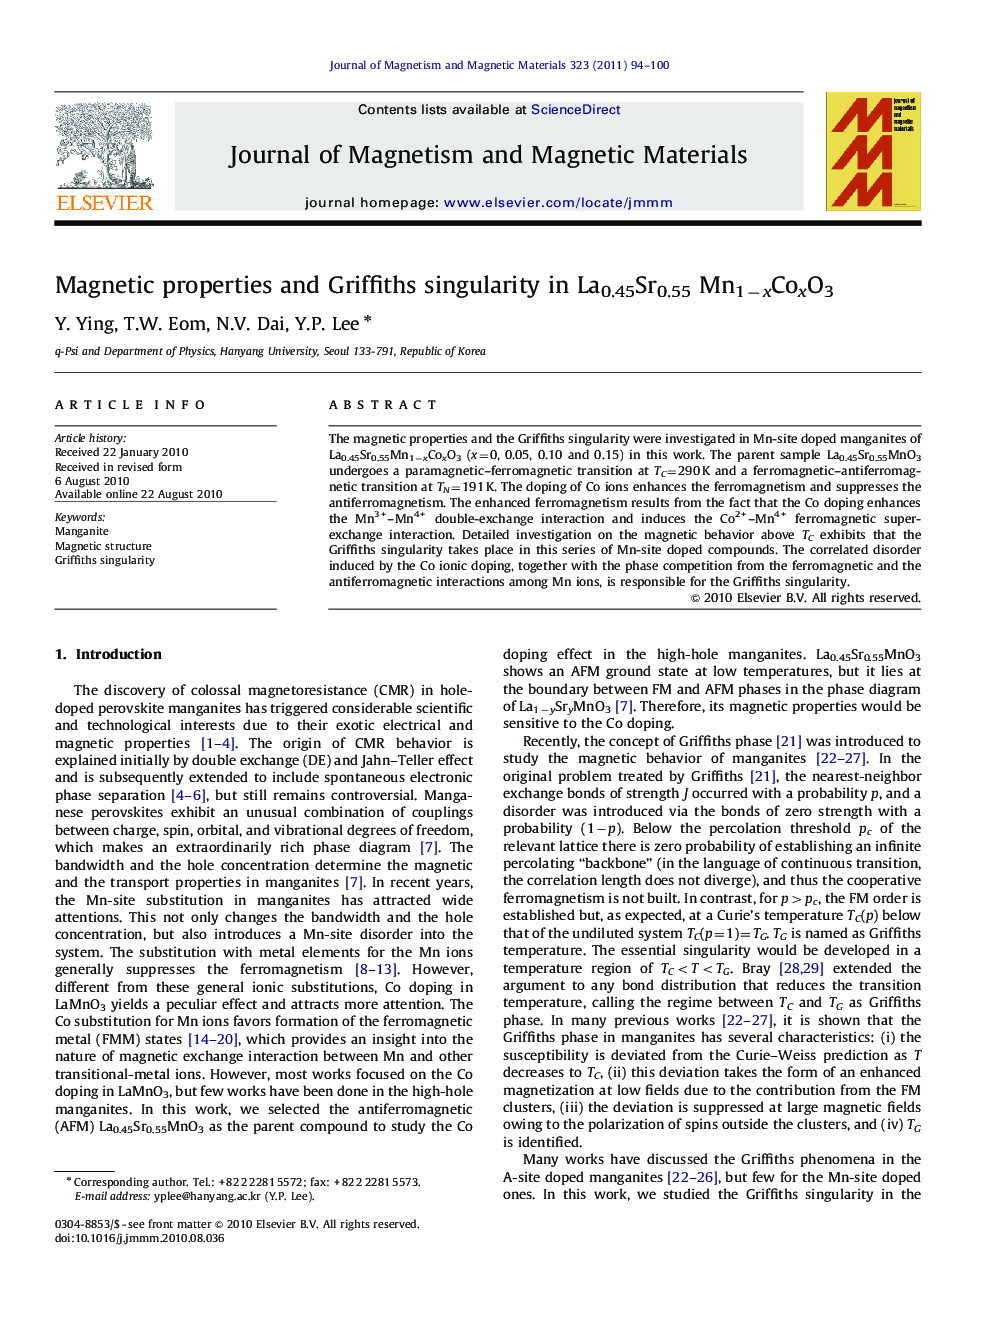 Magnetic properties and Griffiths singularity in La0.45Sr0.55 Mn1−xCoxO3